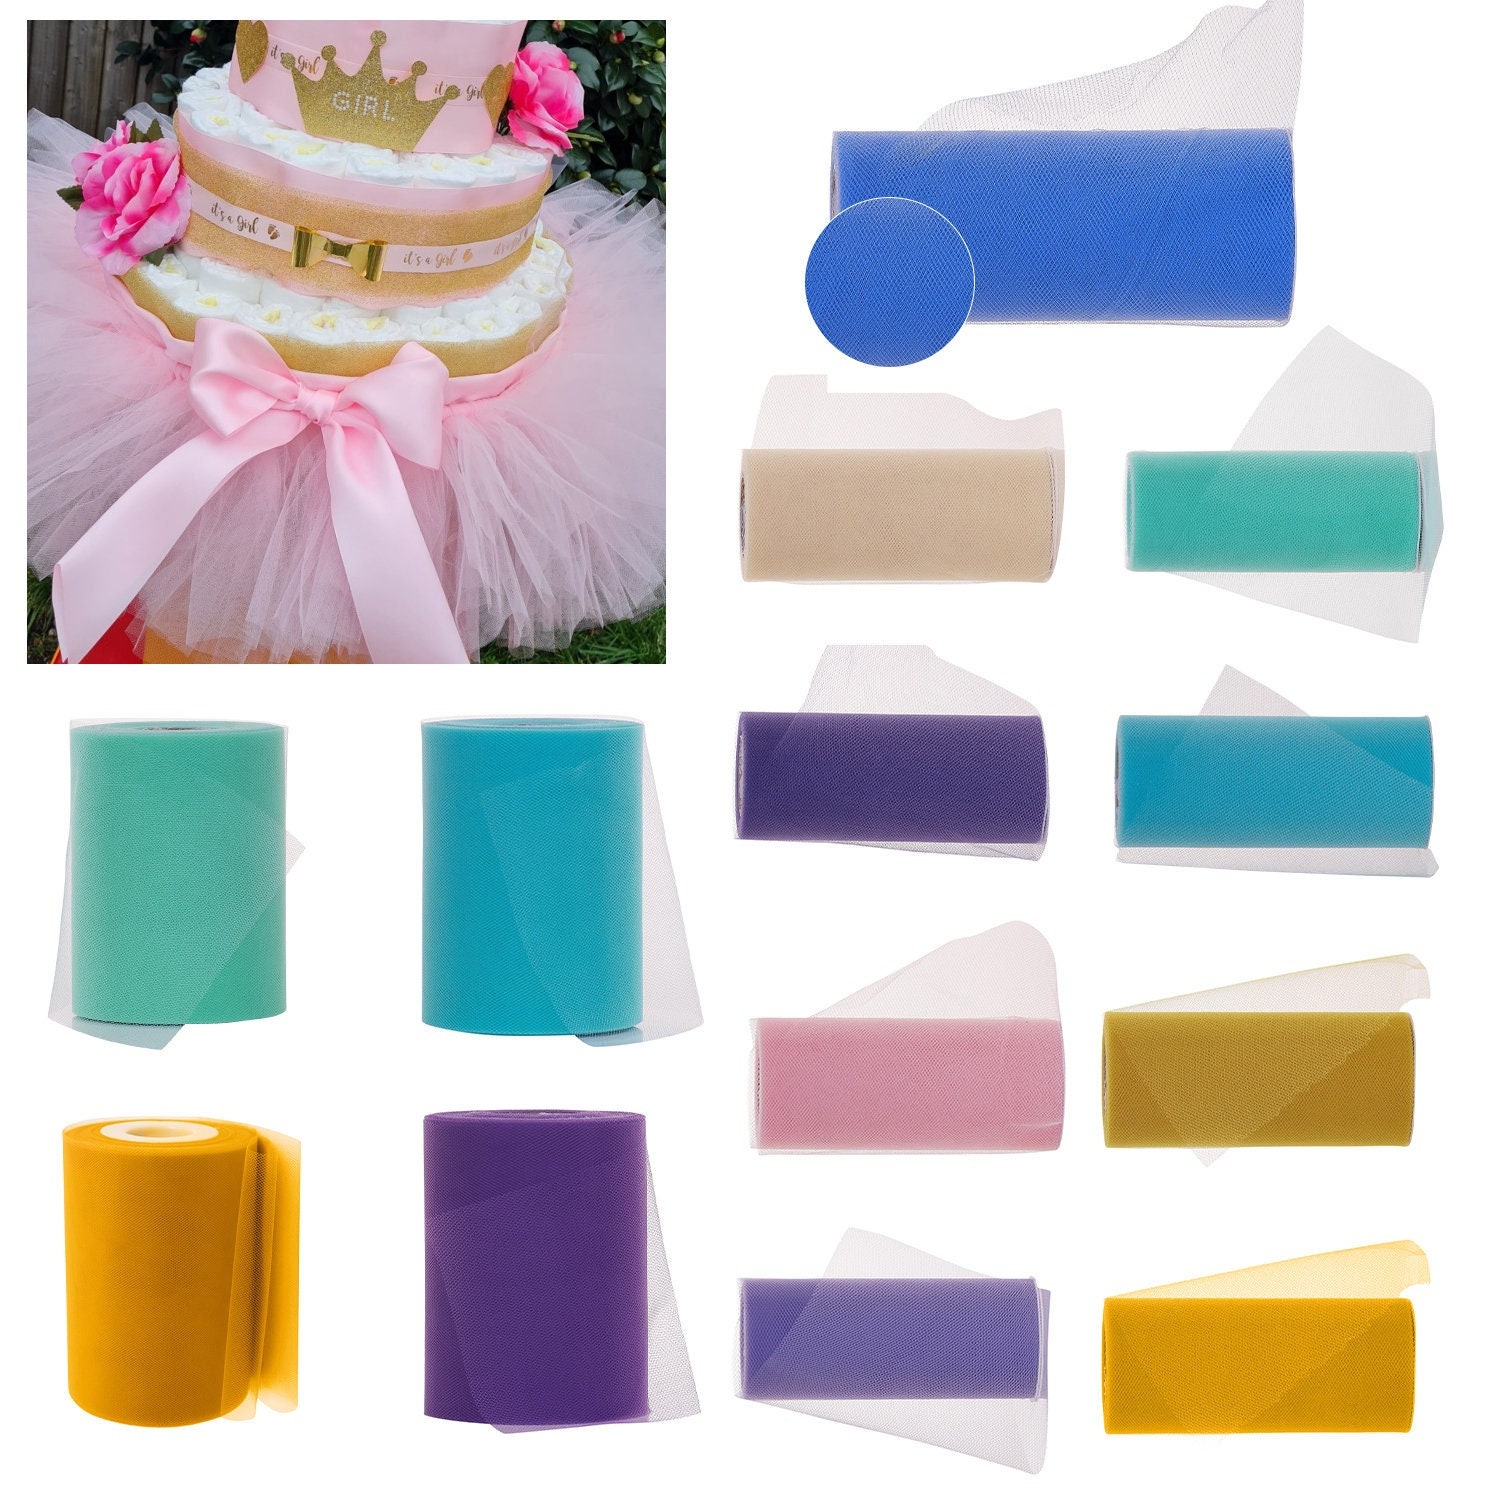 Multicolor Tulle Roll Spool 25 Yards 15cm Organza Roll Tulle